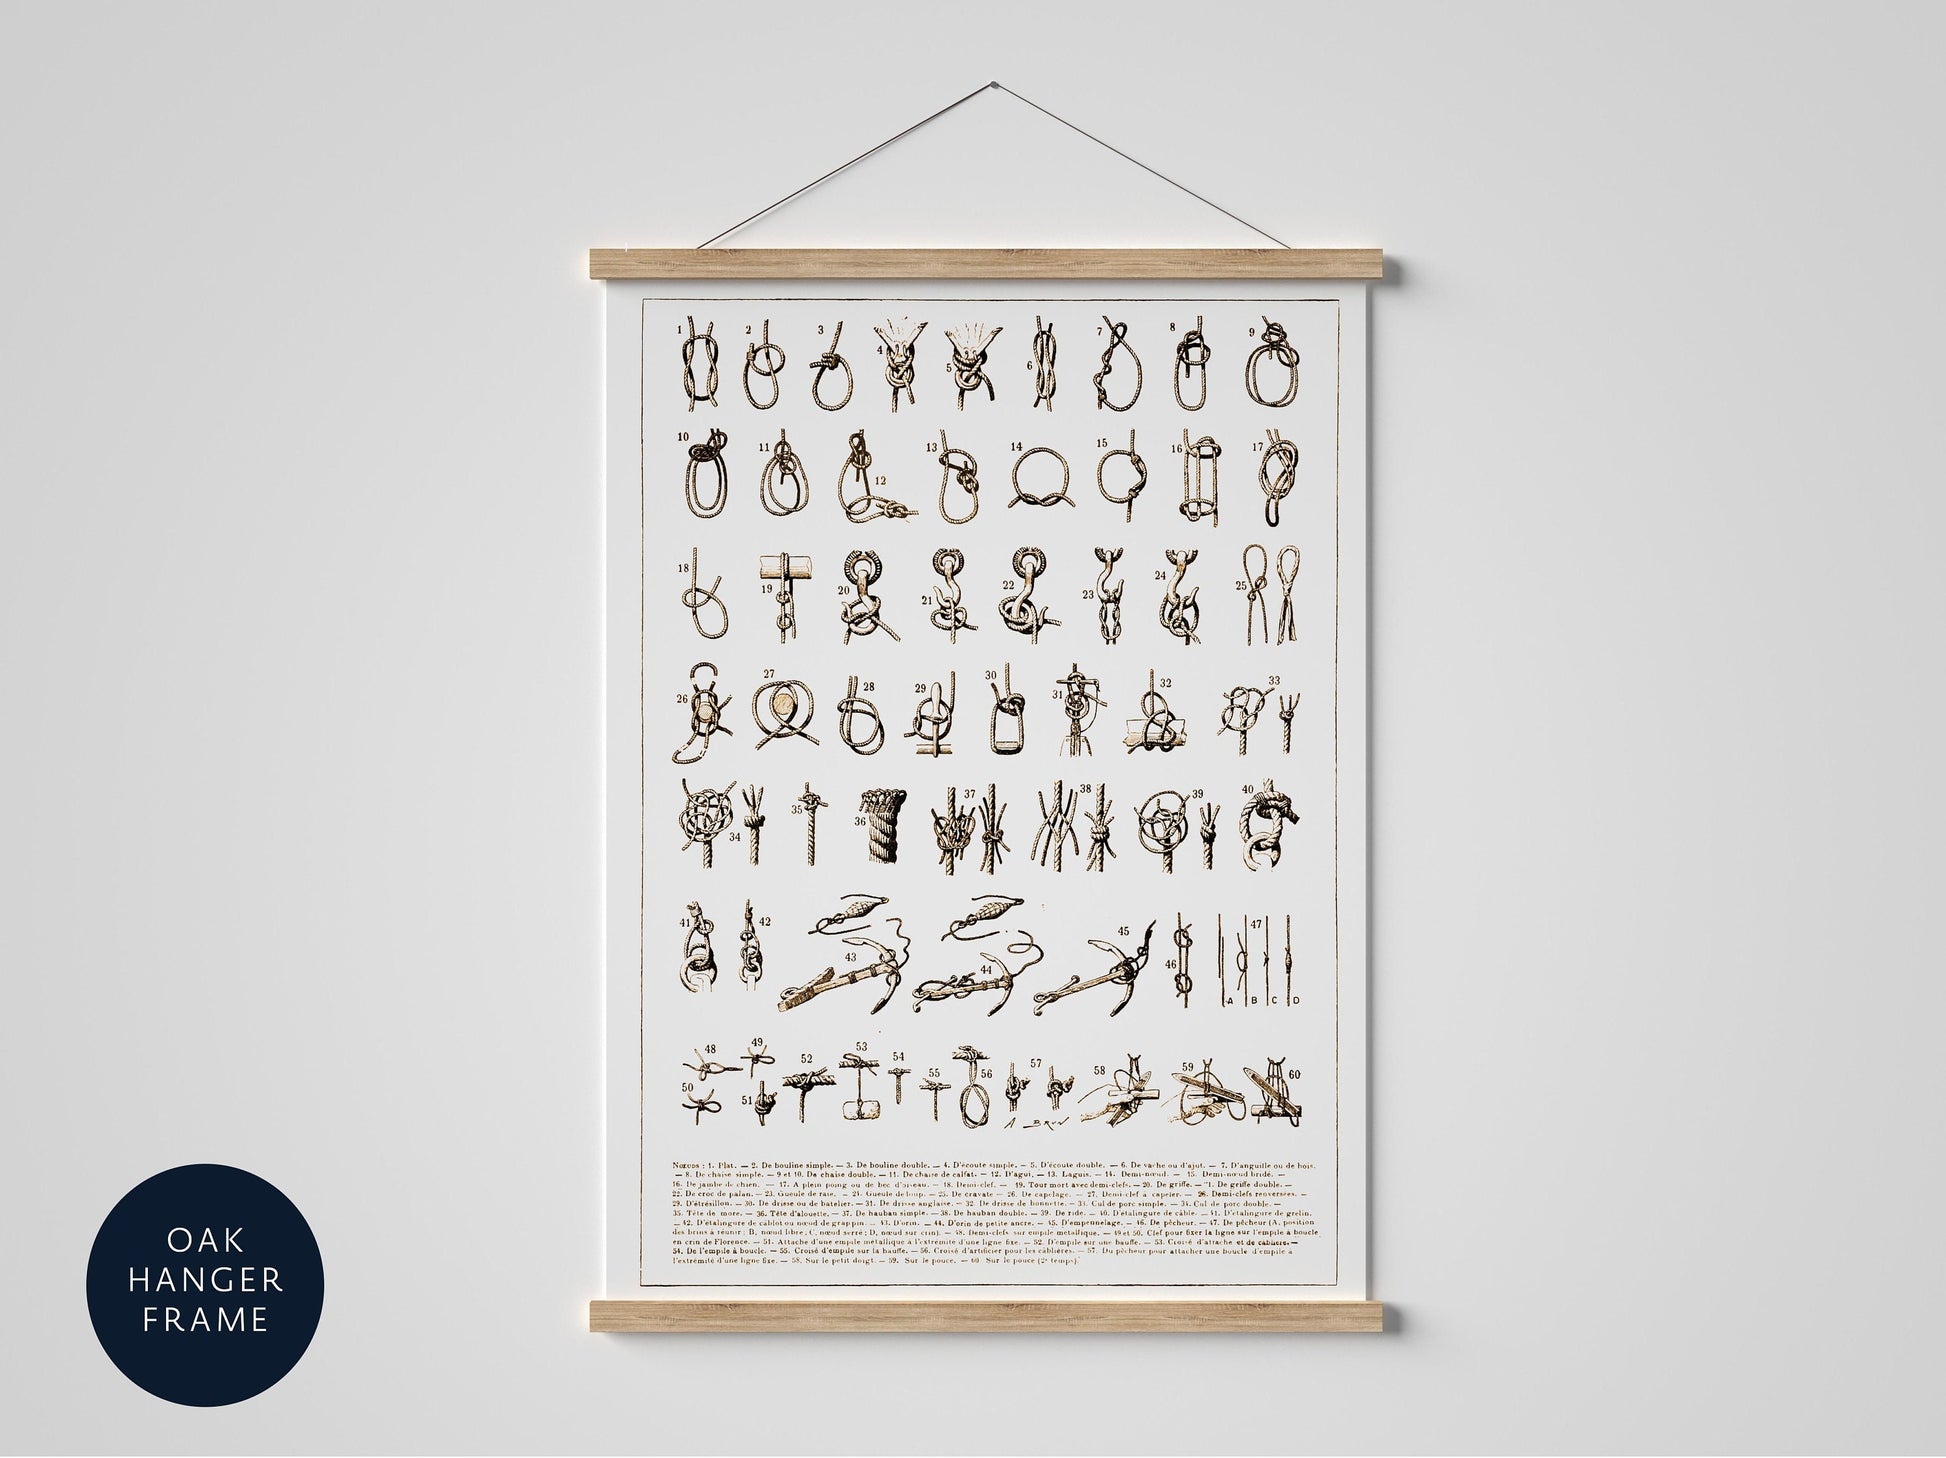 Knot Poster, Vintage nautical print, Framed seaside sailor print, maritime different knot types, common naval knots, mariners knots, scout